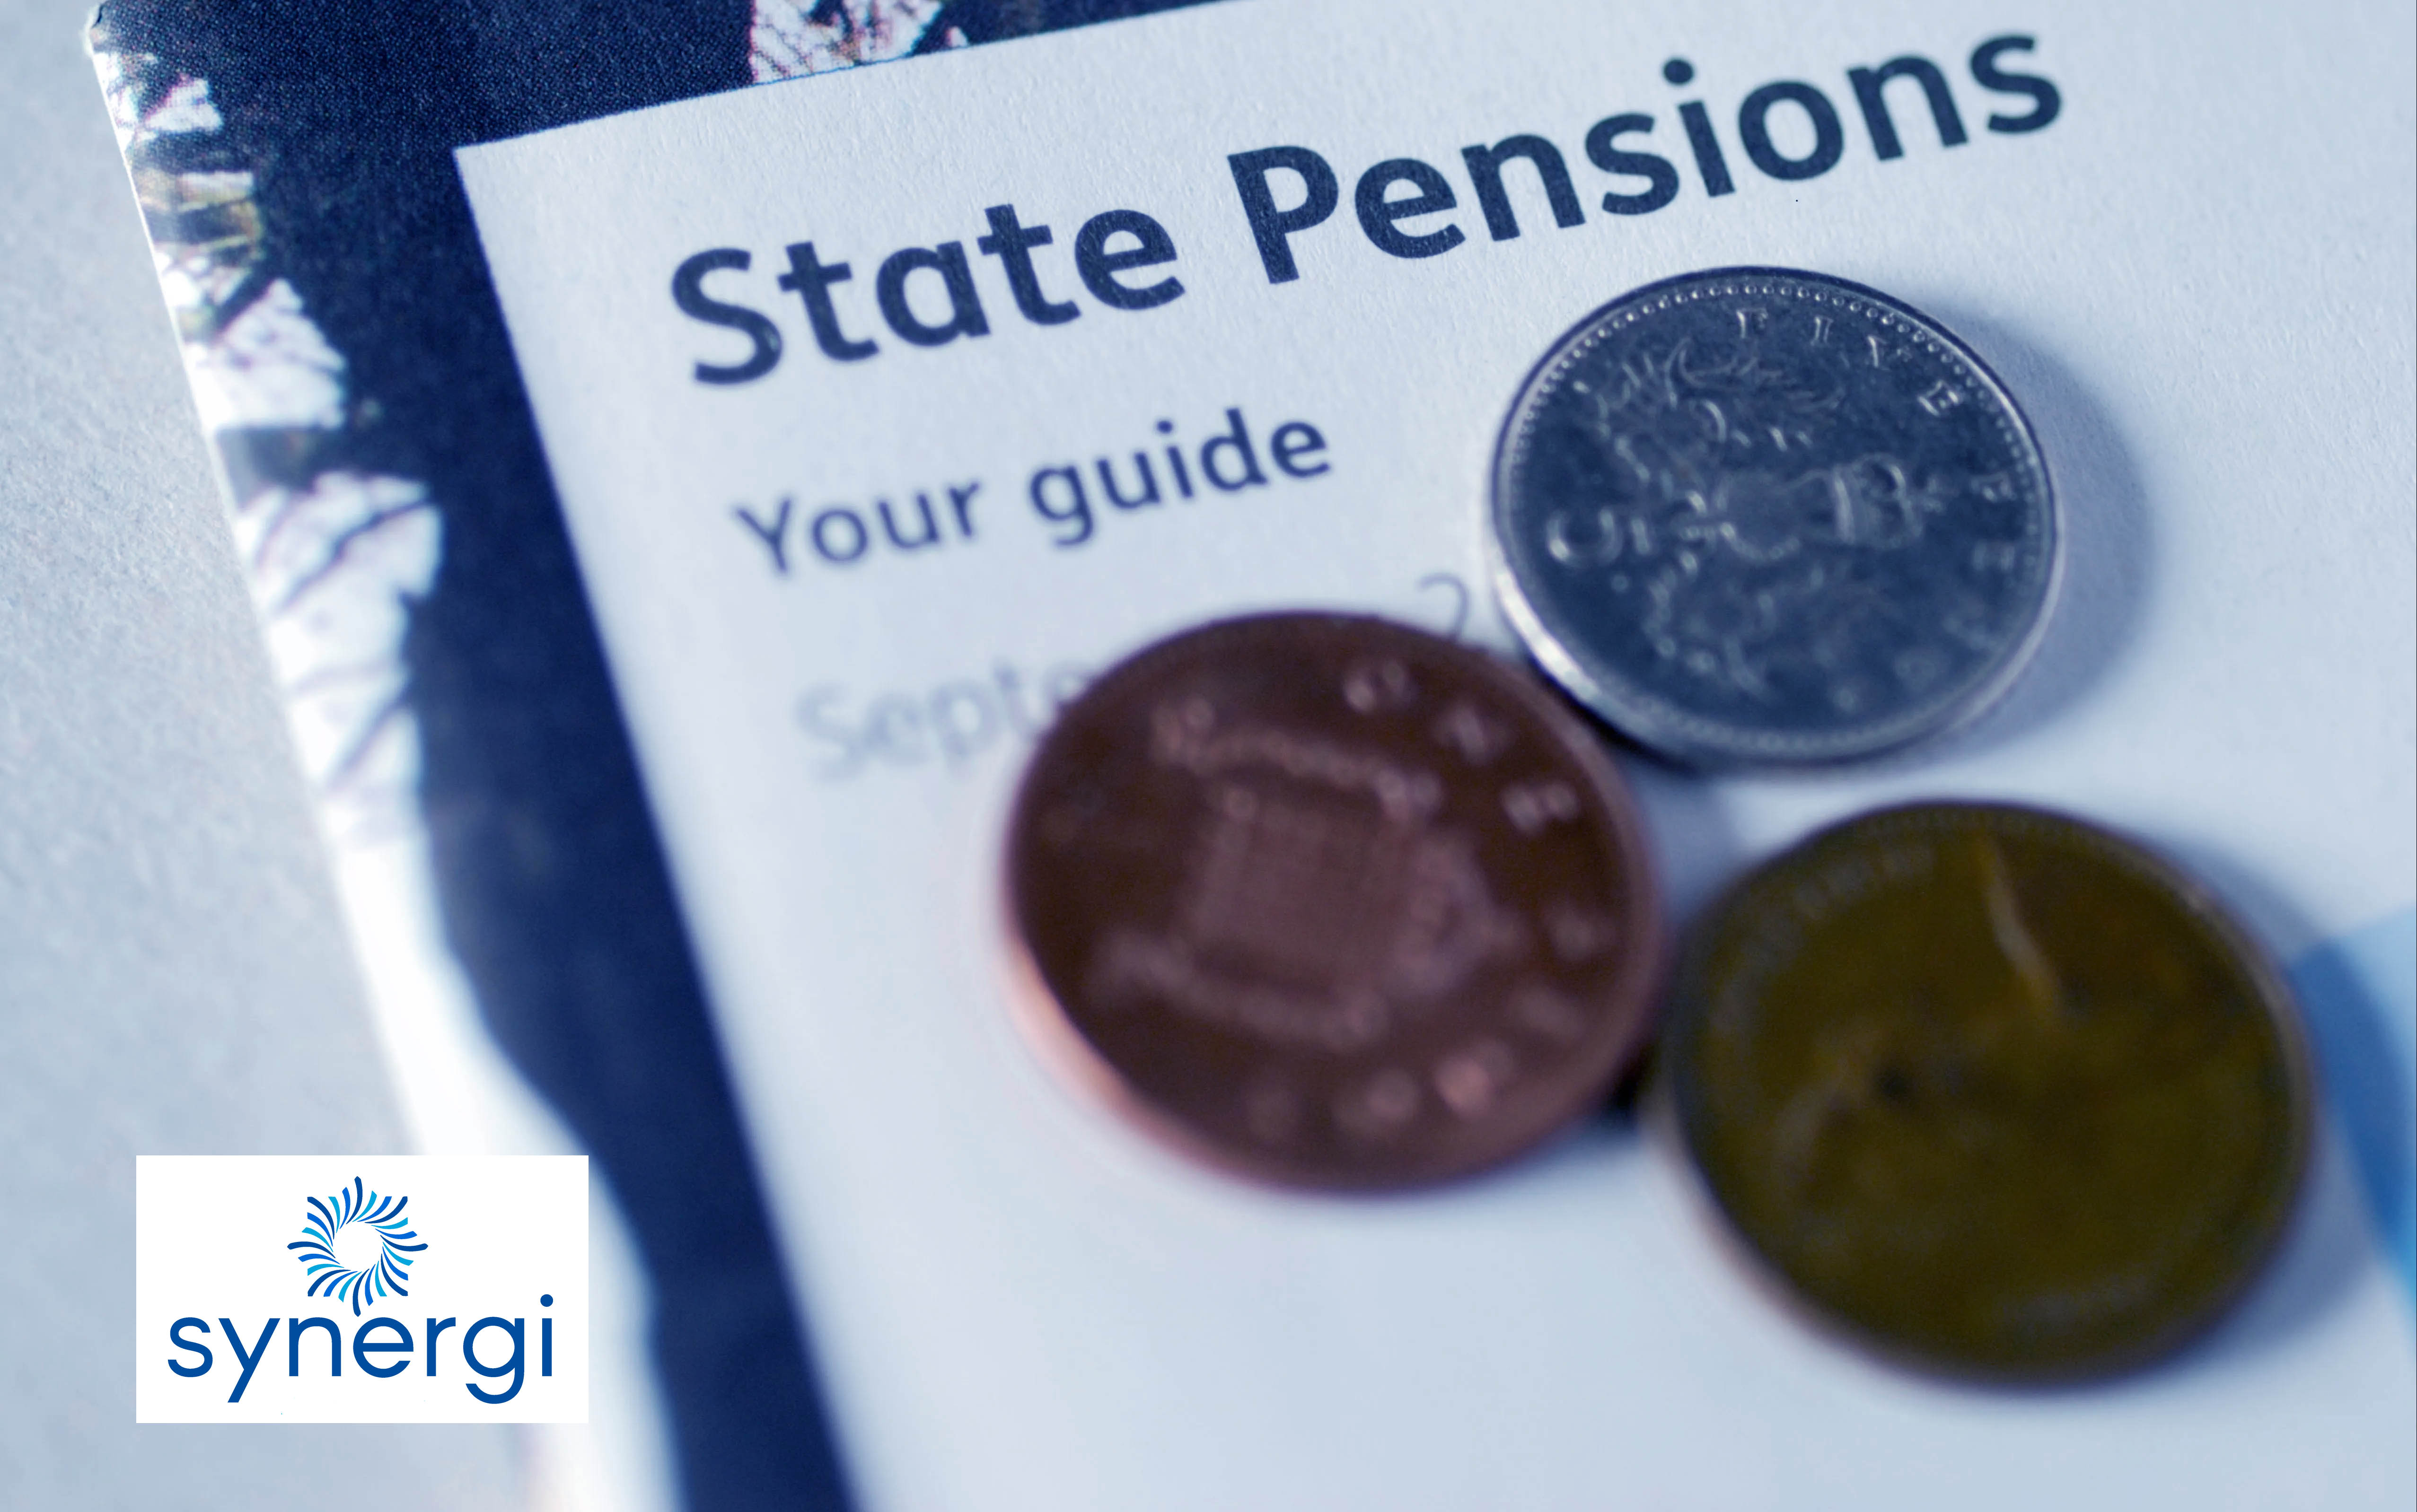 State Pension Changes – Quick giude